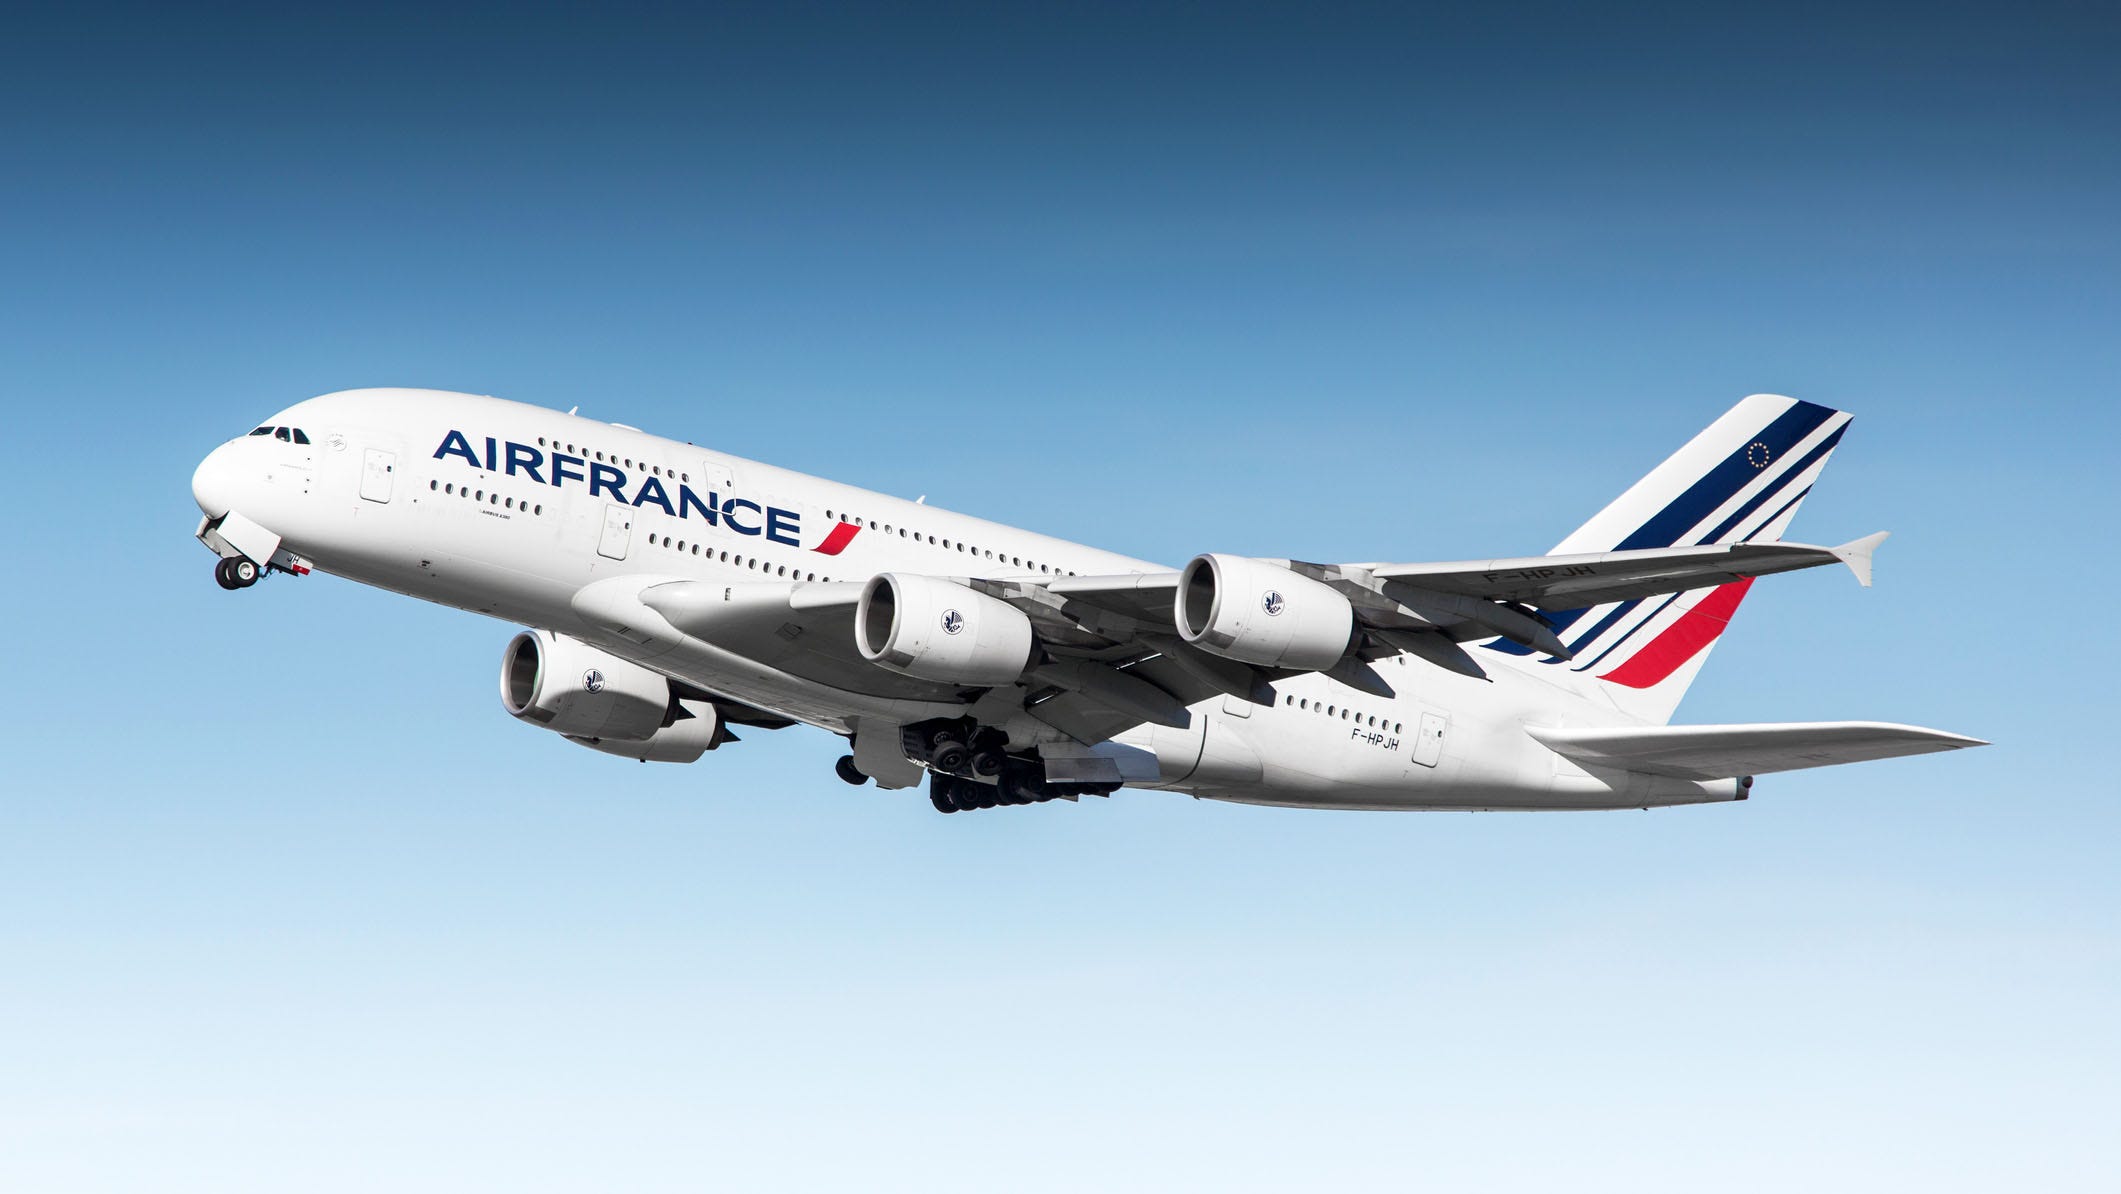 The Air France passenger forces the plane to make an emergency landing after acting aggressively, knocking on the cabin door